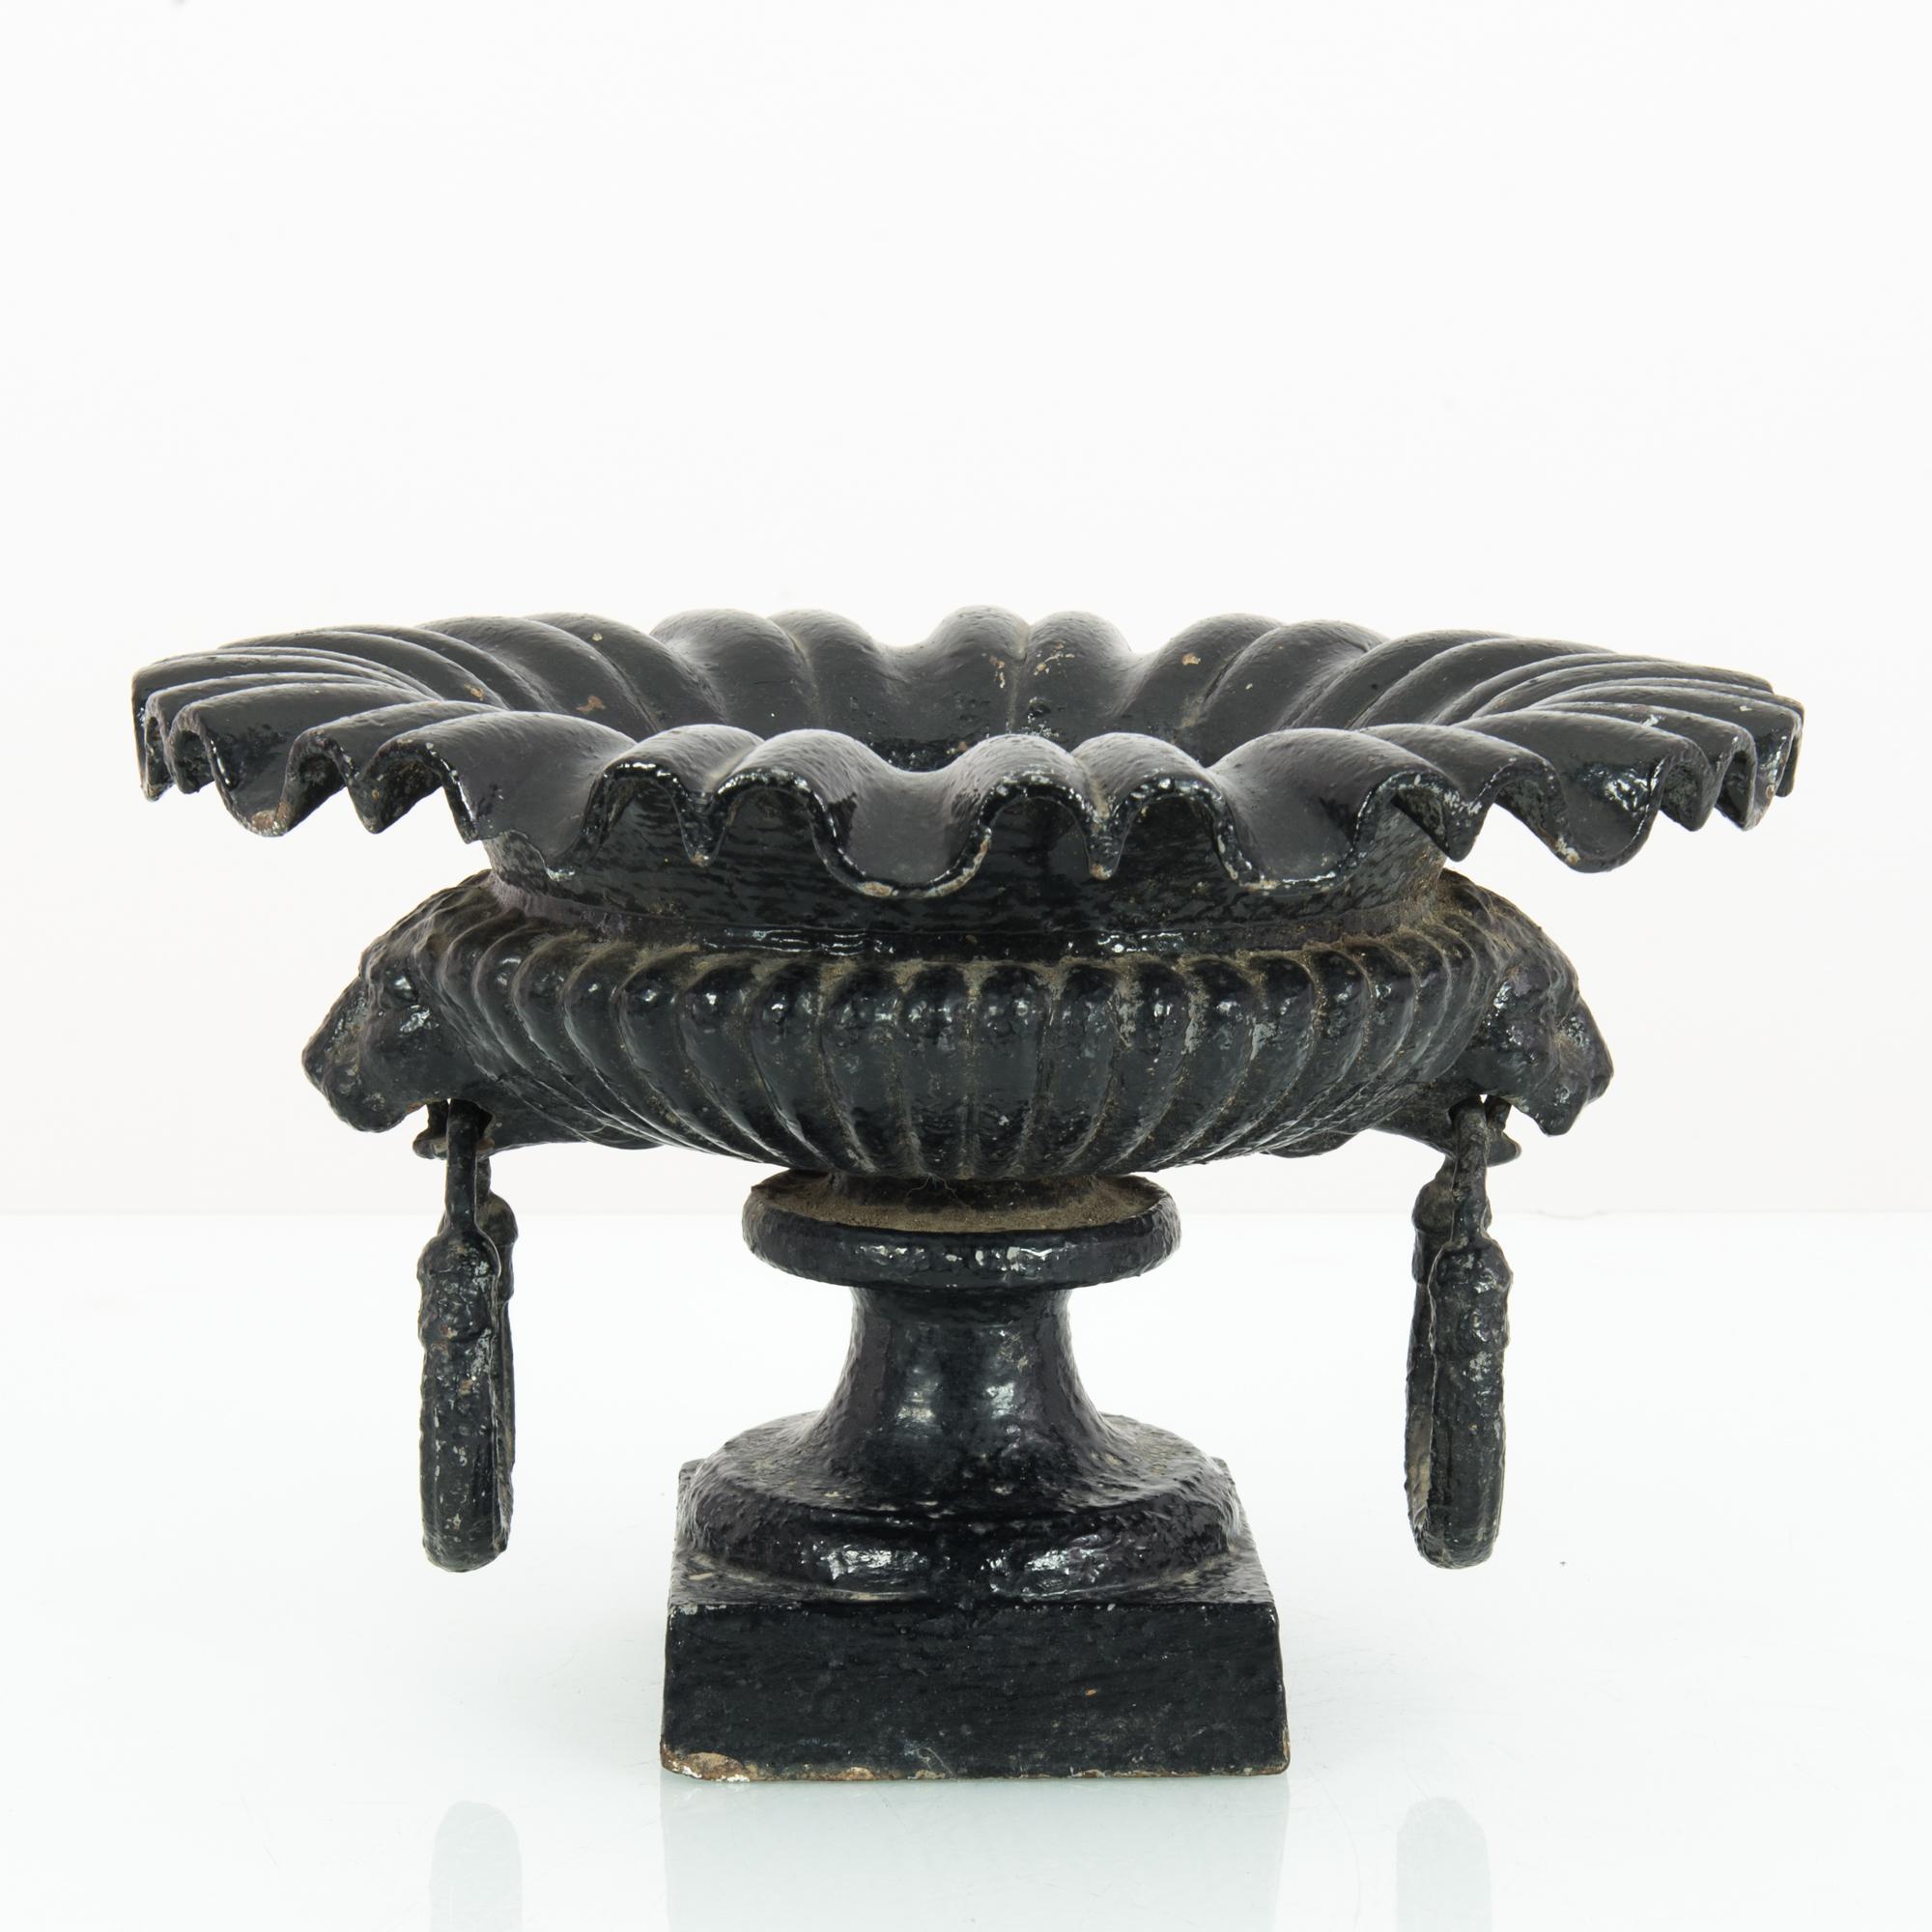 This cast iron planter with a square base was made in France. It features a flared, fluted rim and a lobed body, revealing a neoclassical influence. Rings dangle from the mouths of lion heads on the sides.